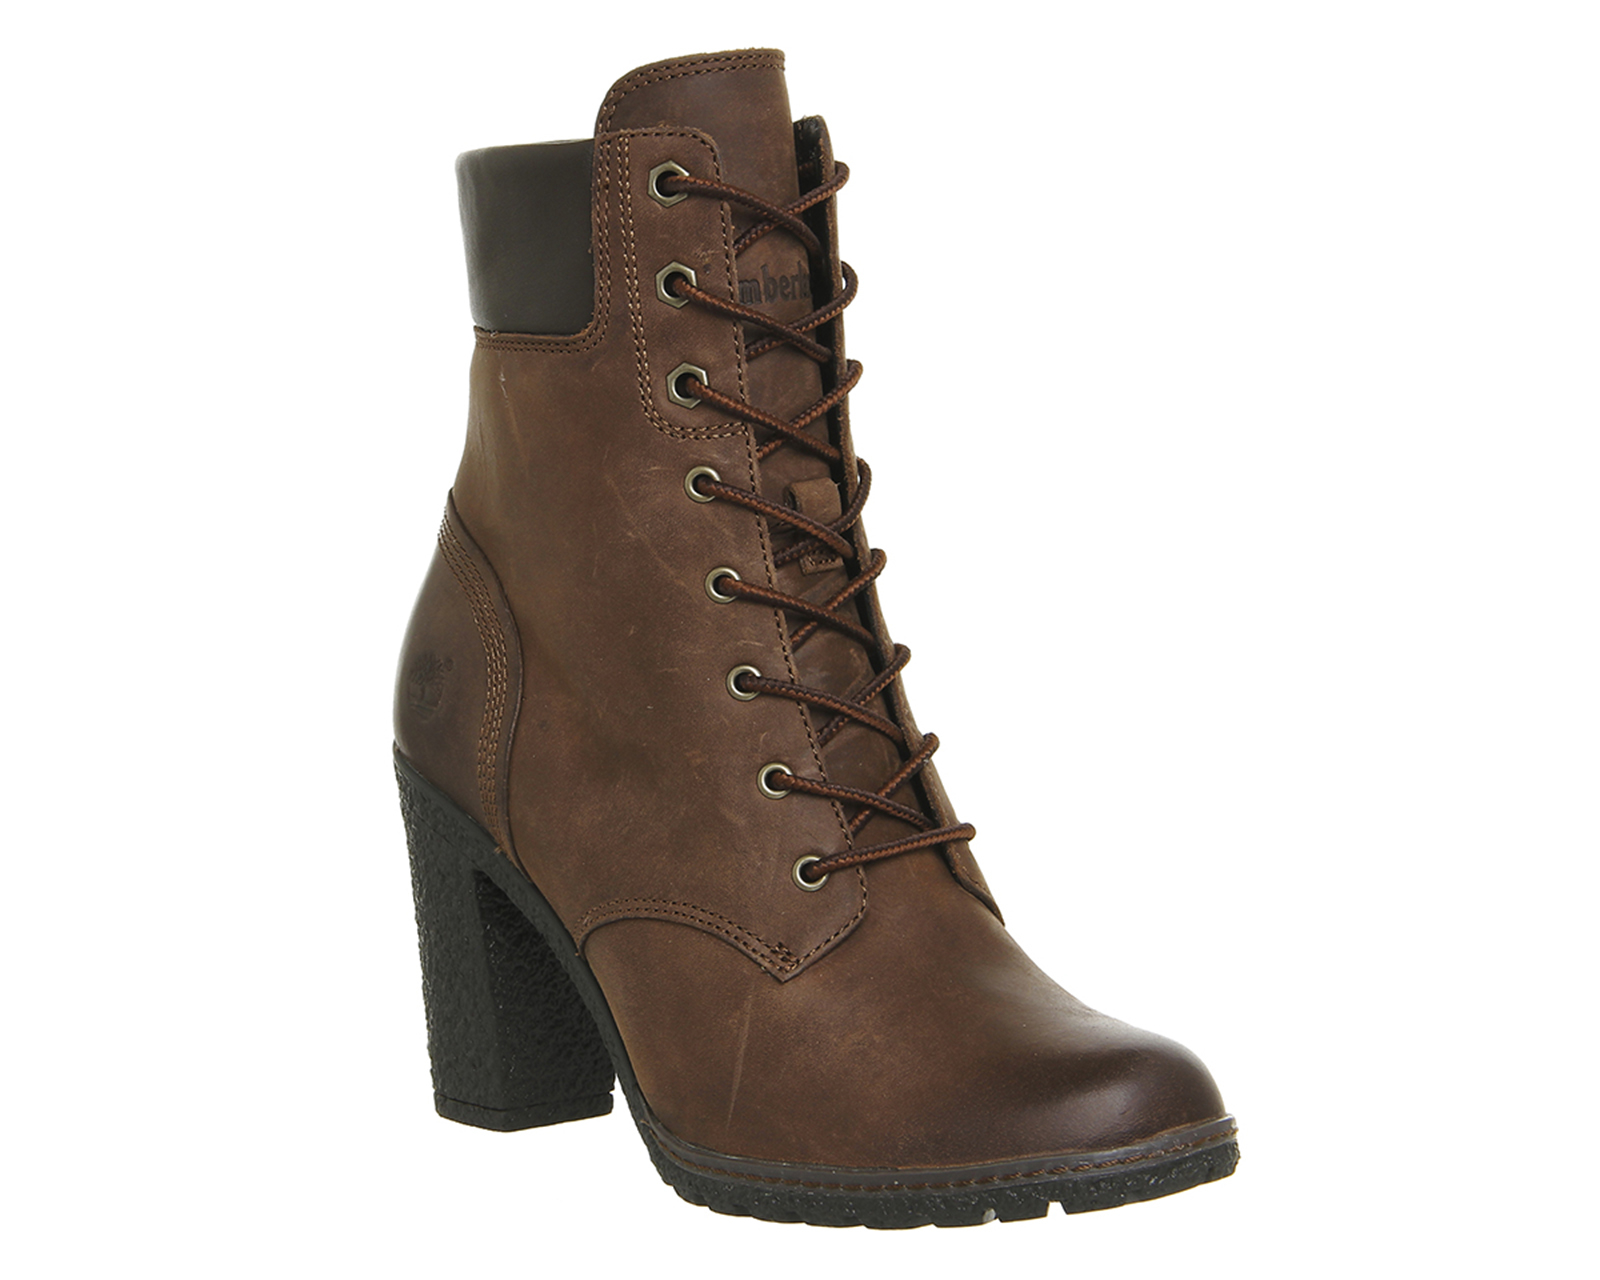 Lyst - Timberland Glancy 6 Inch Heel Boots in Brown